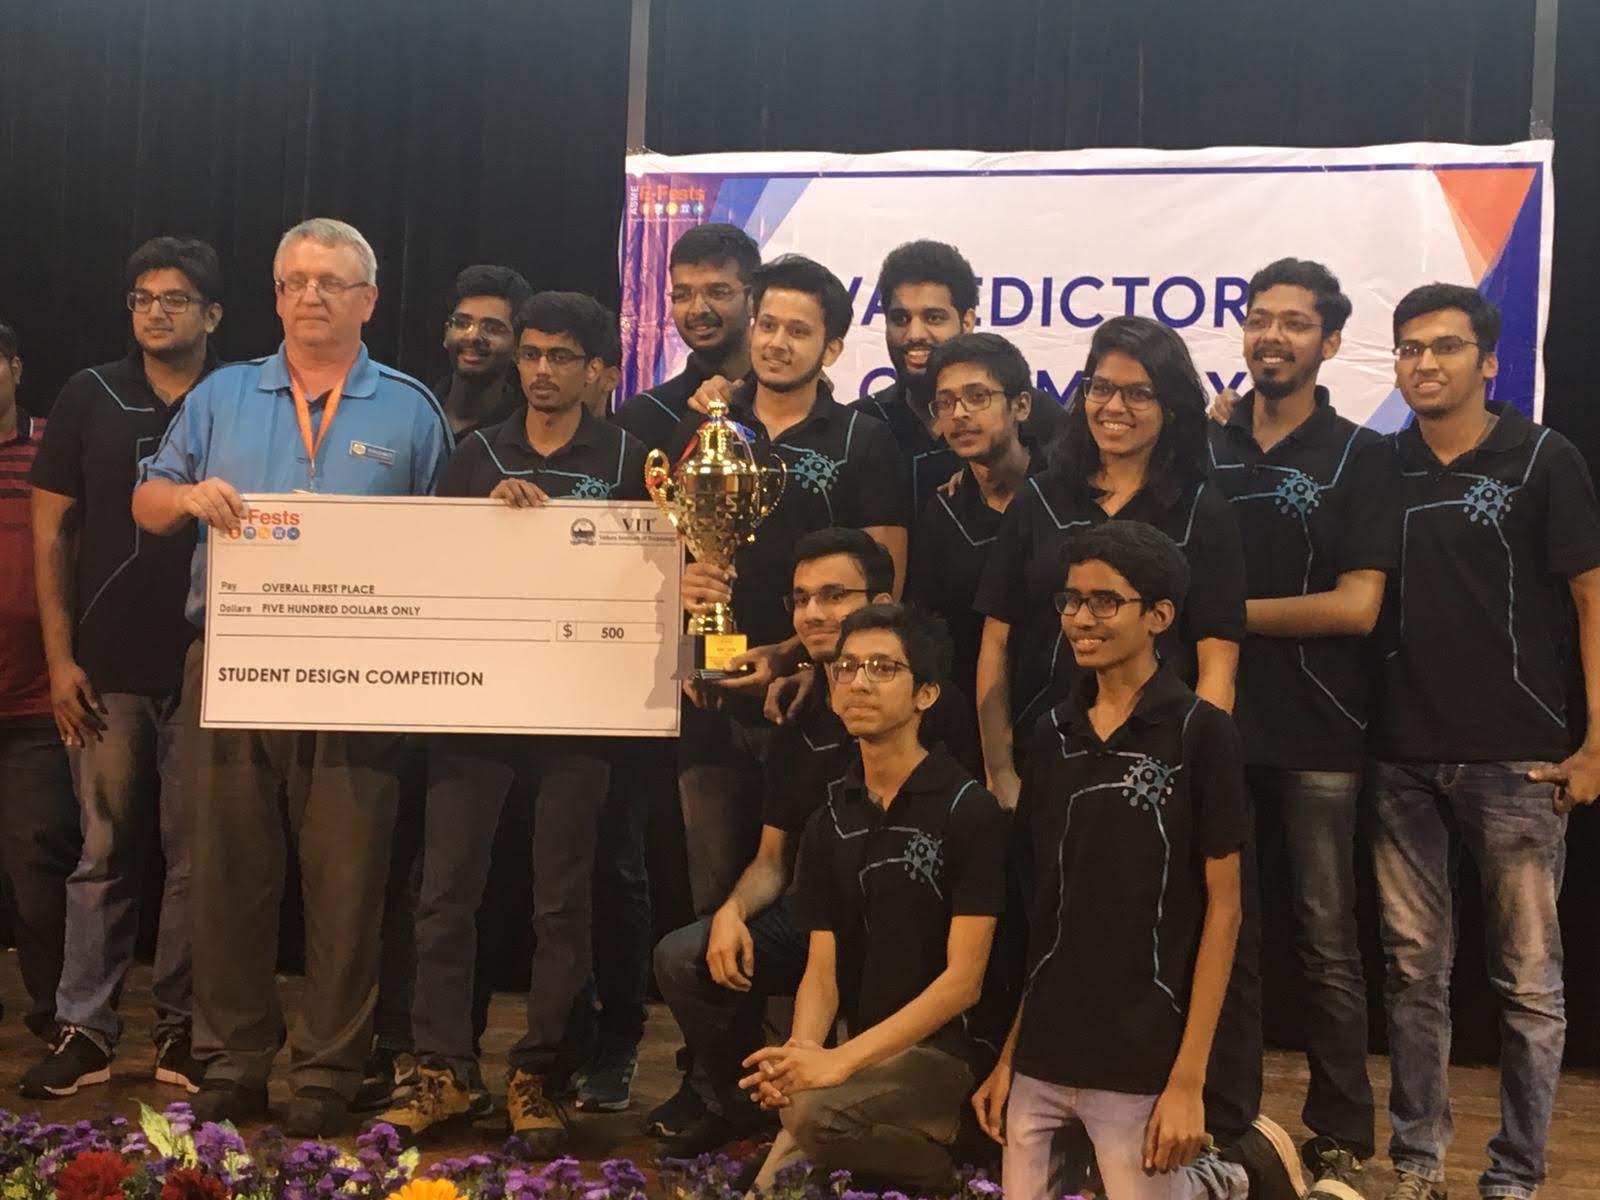 The team won the Asia Pacific regionals of Student Design Competition (SDC) in 2019 organized by American Society of Mechanical Engineering (ASME) beating all teams across the Asia Pacific region.